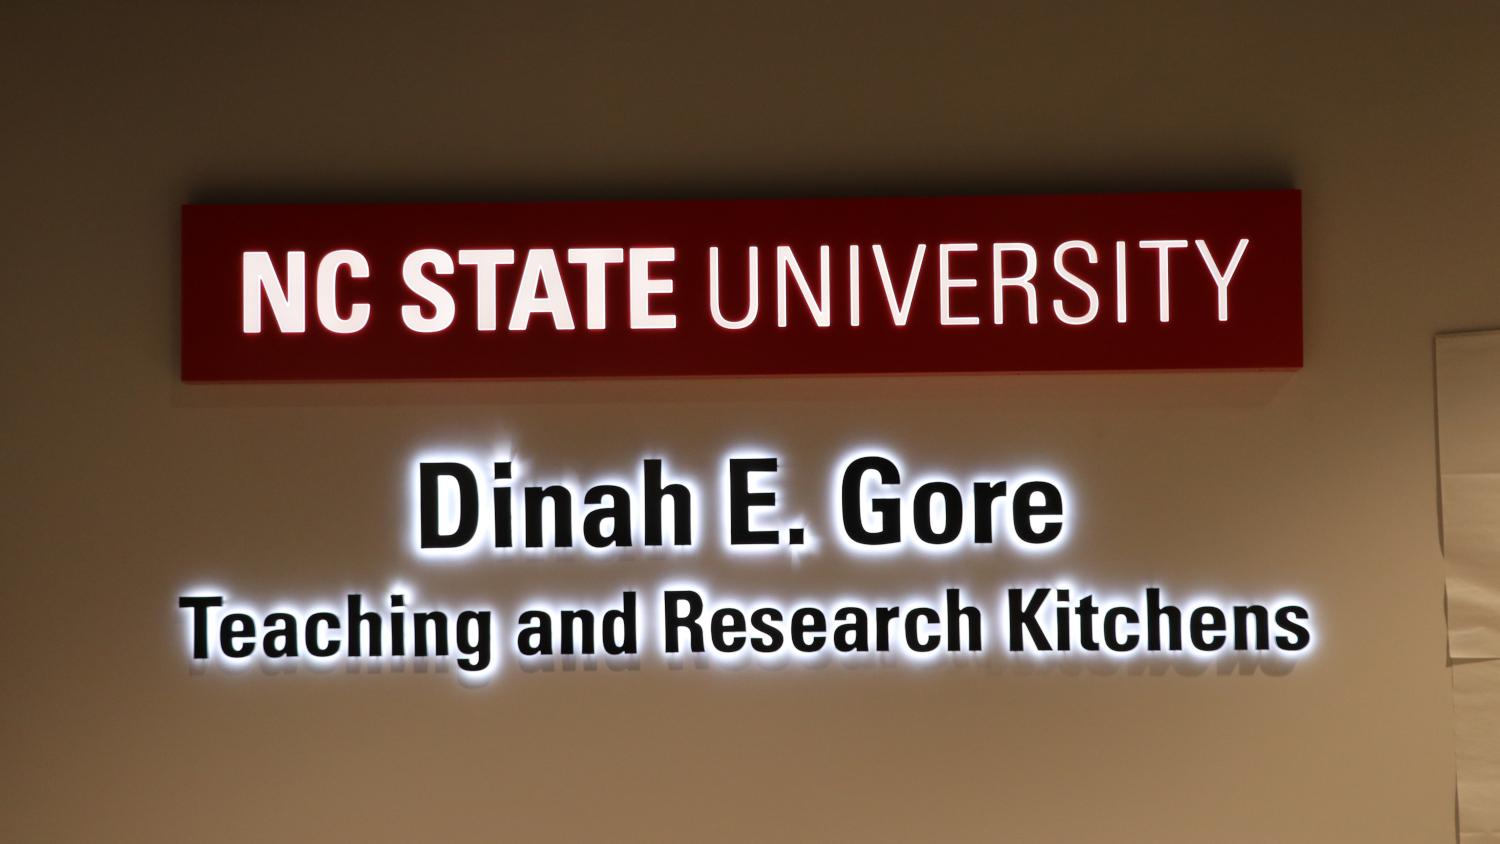 Shows text: Dinah E. Gore. Teaching and Research Kitchens